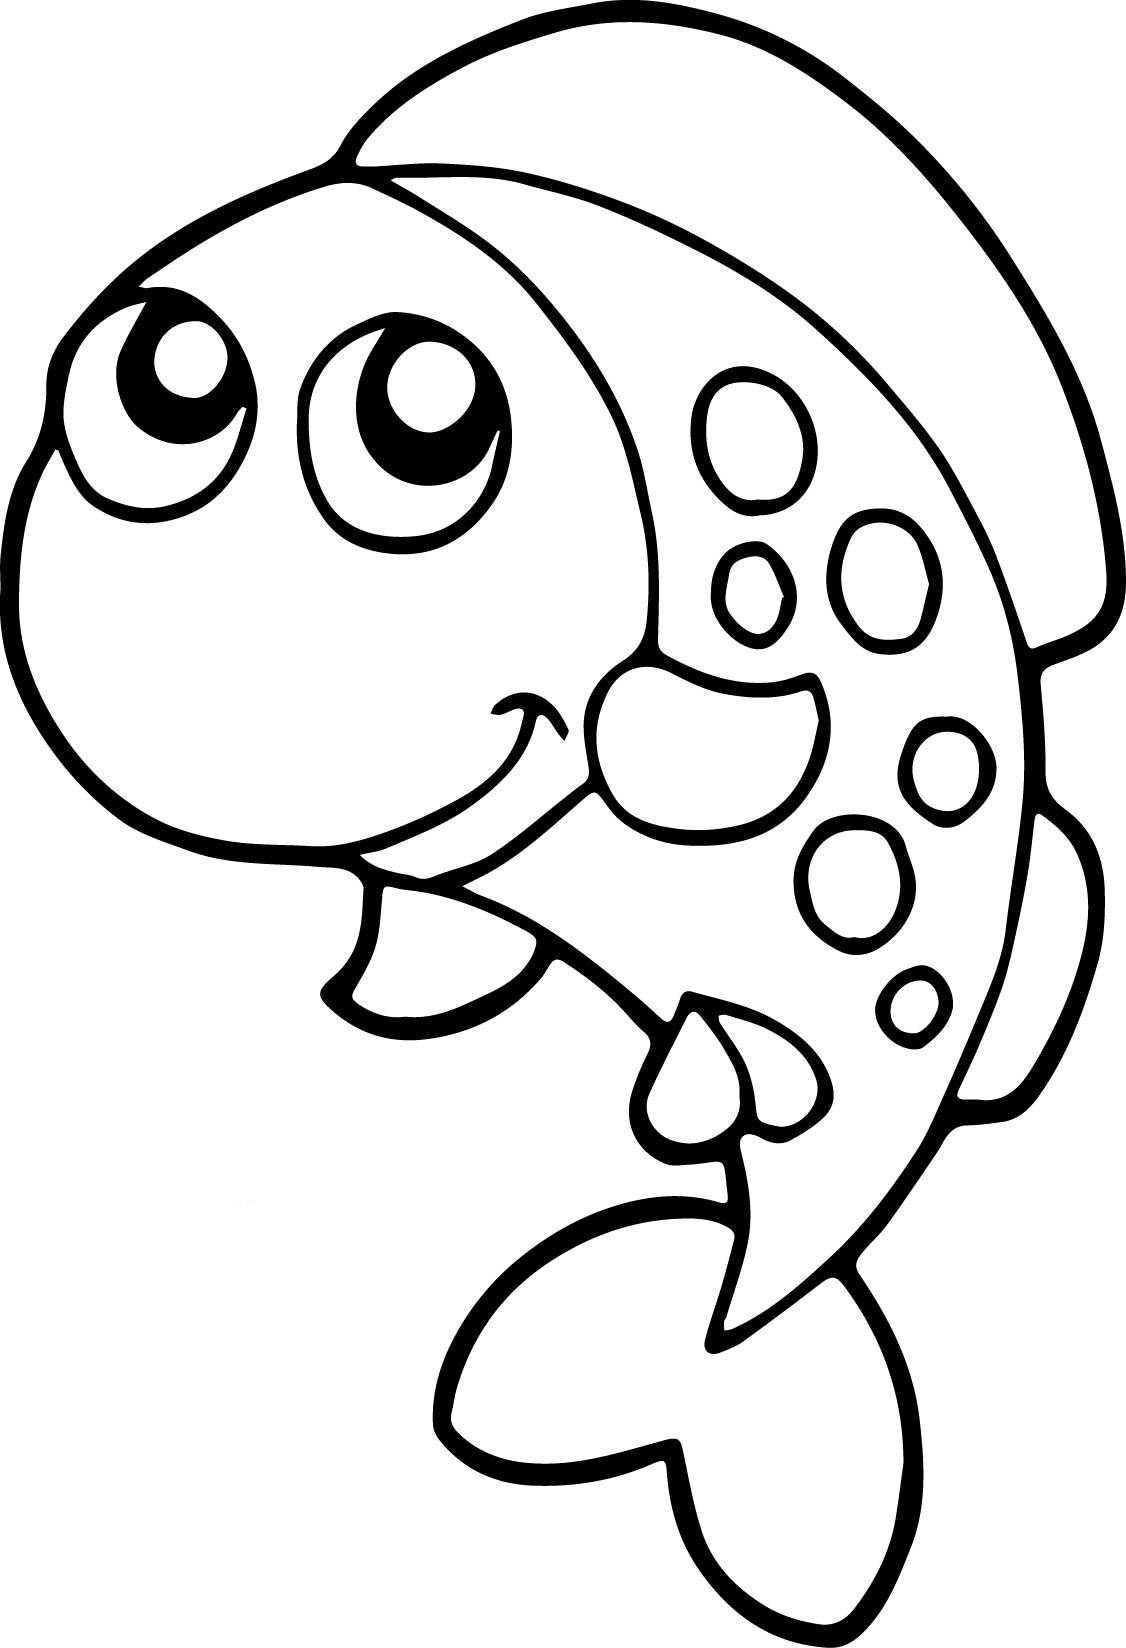 Fish Coloring Pages For Kids - Preschool and Kindergarten